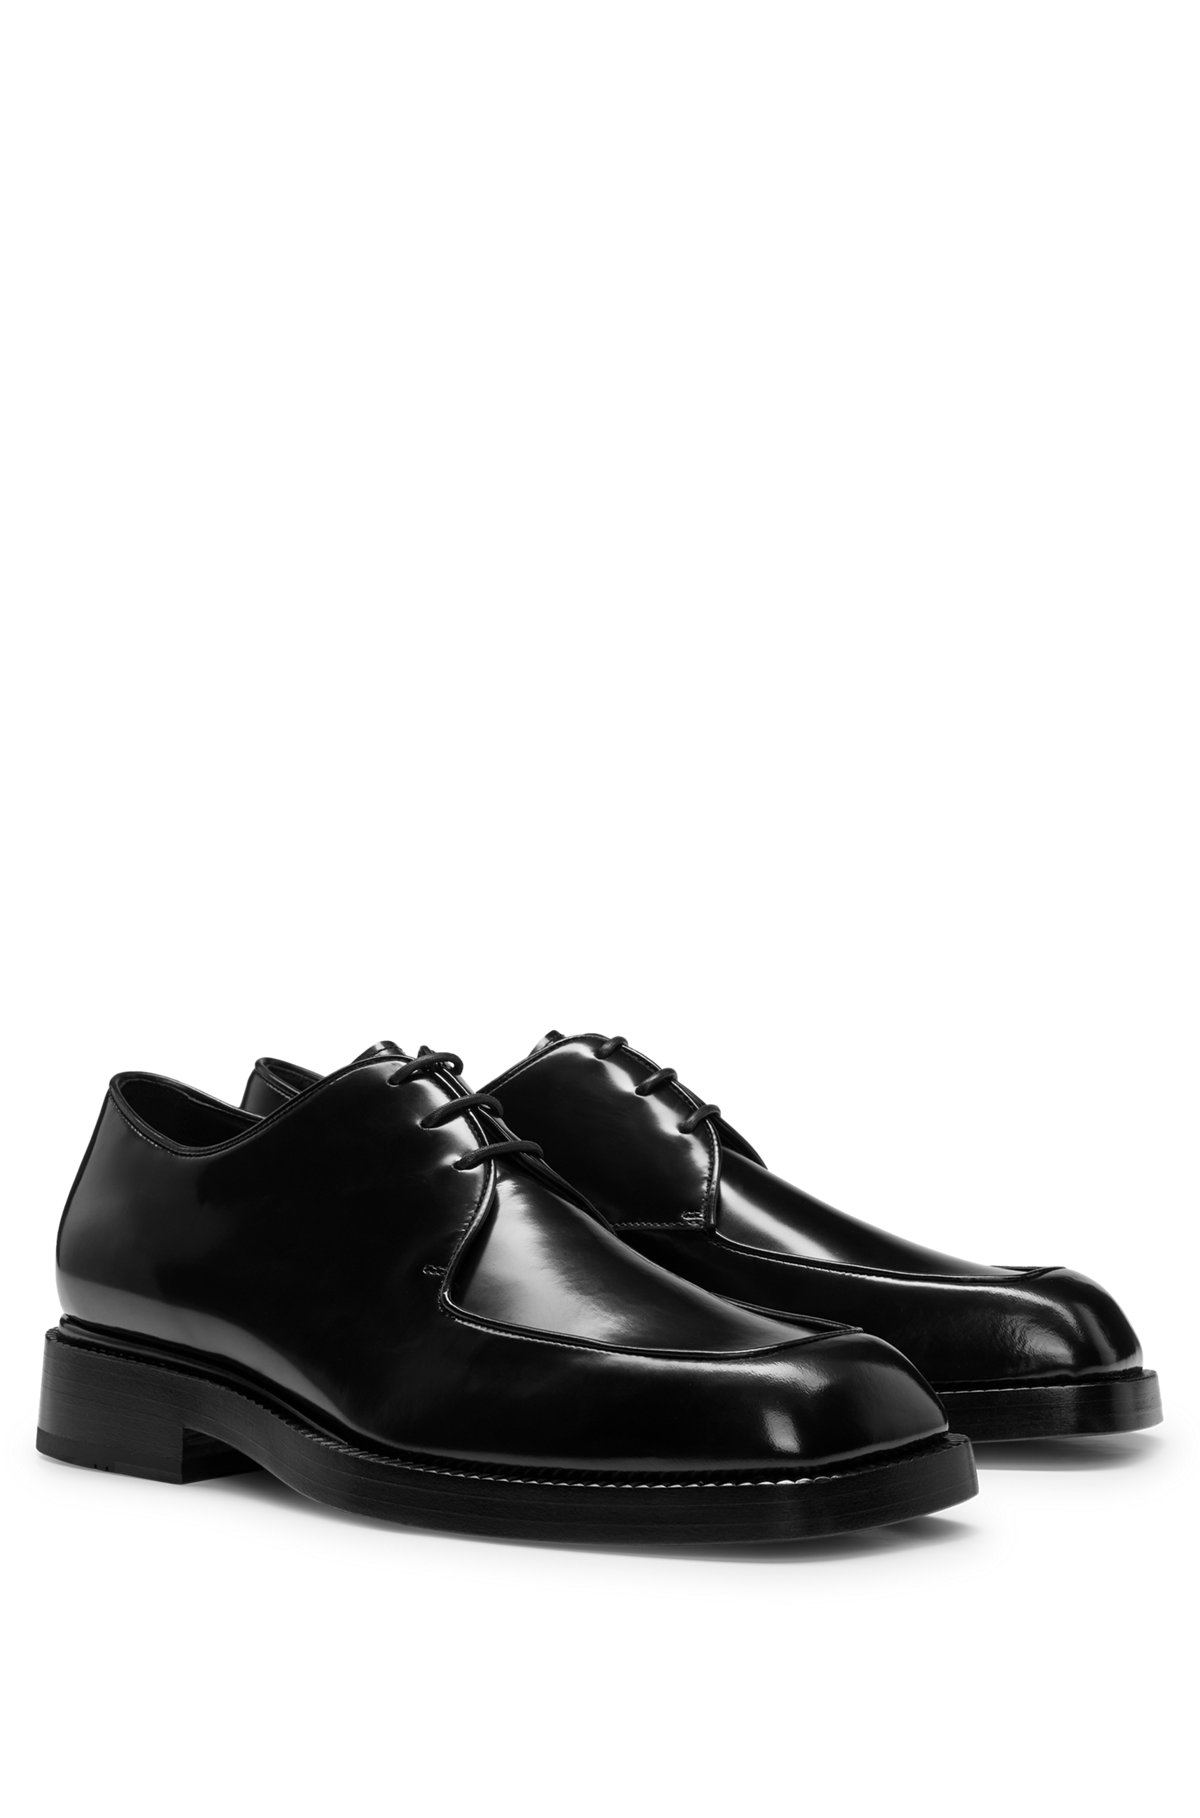 Lace-up Derby shoes in leather, Black